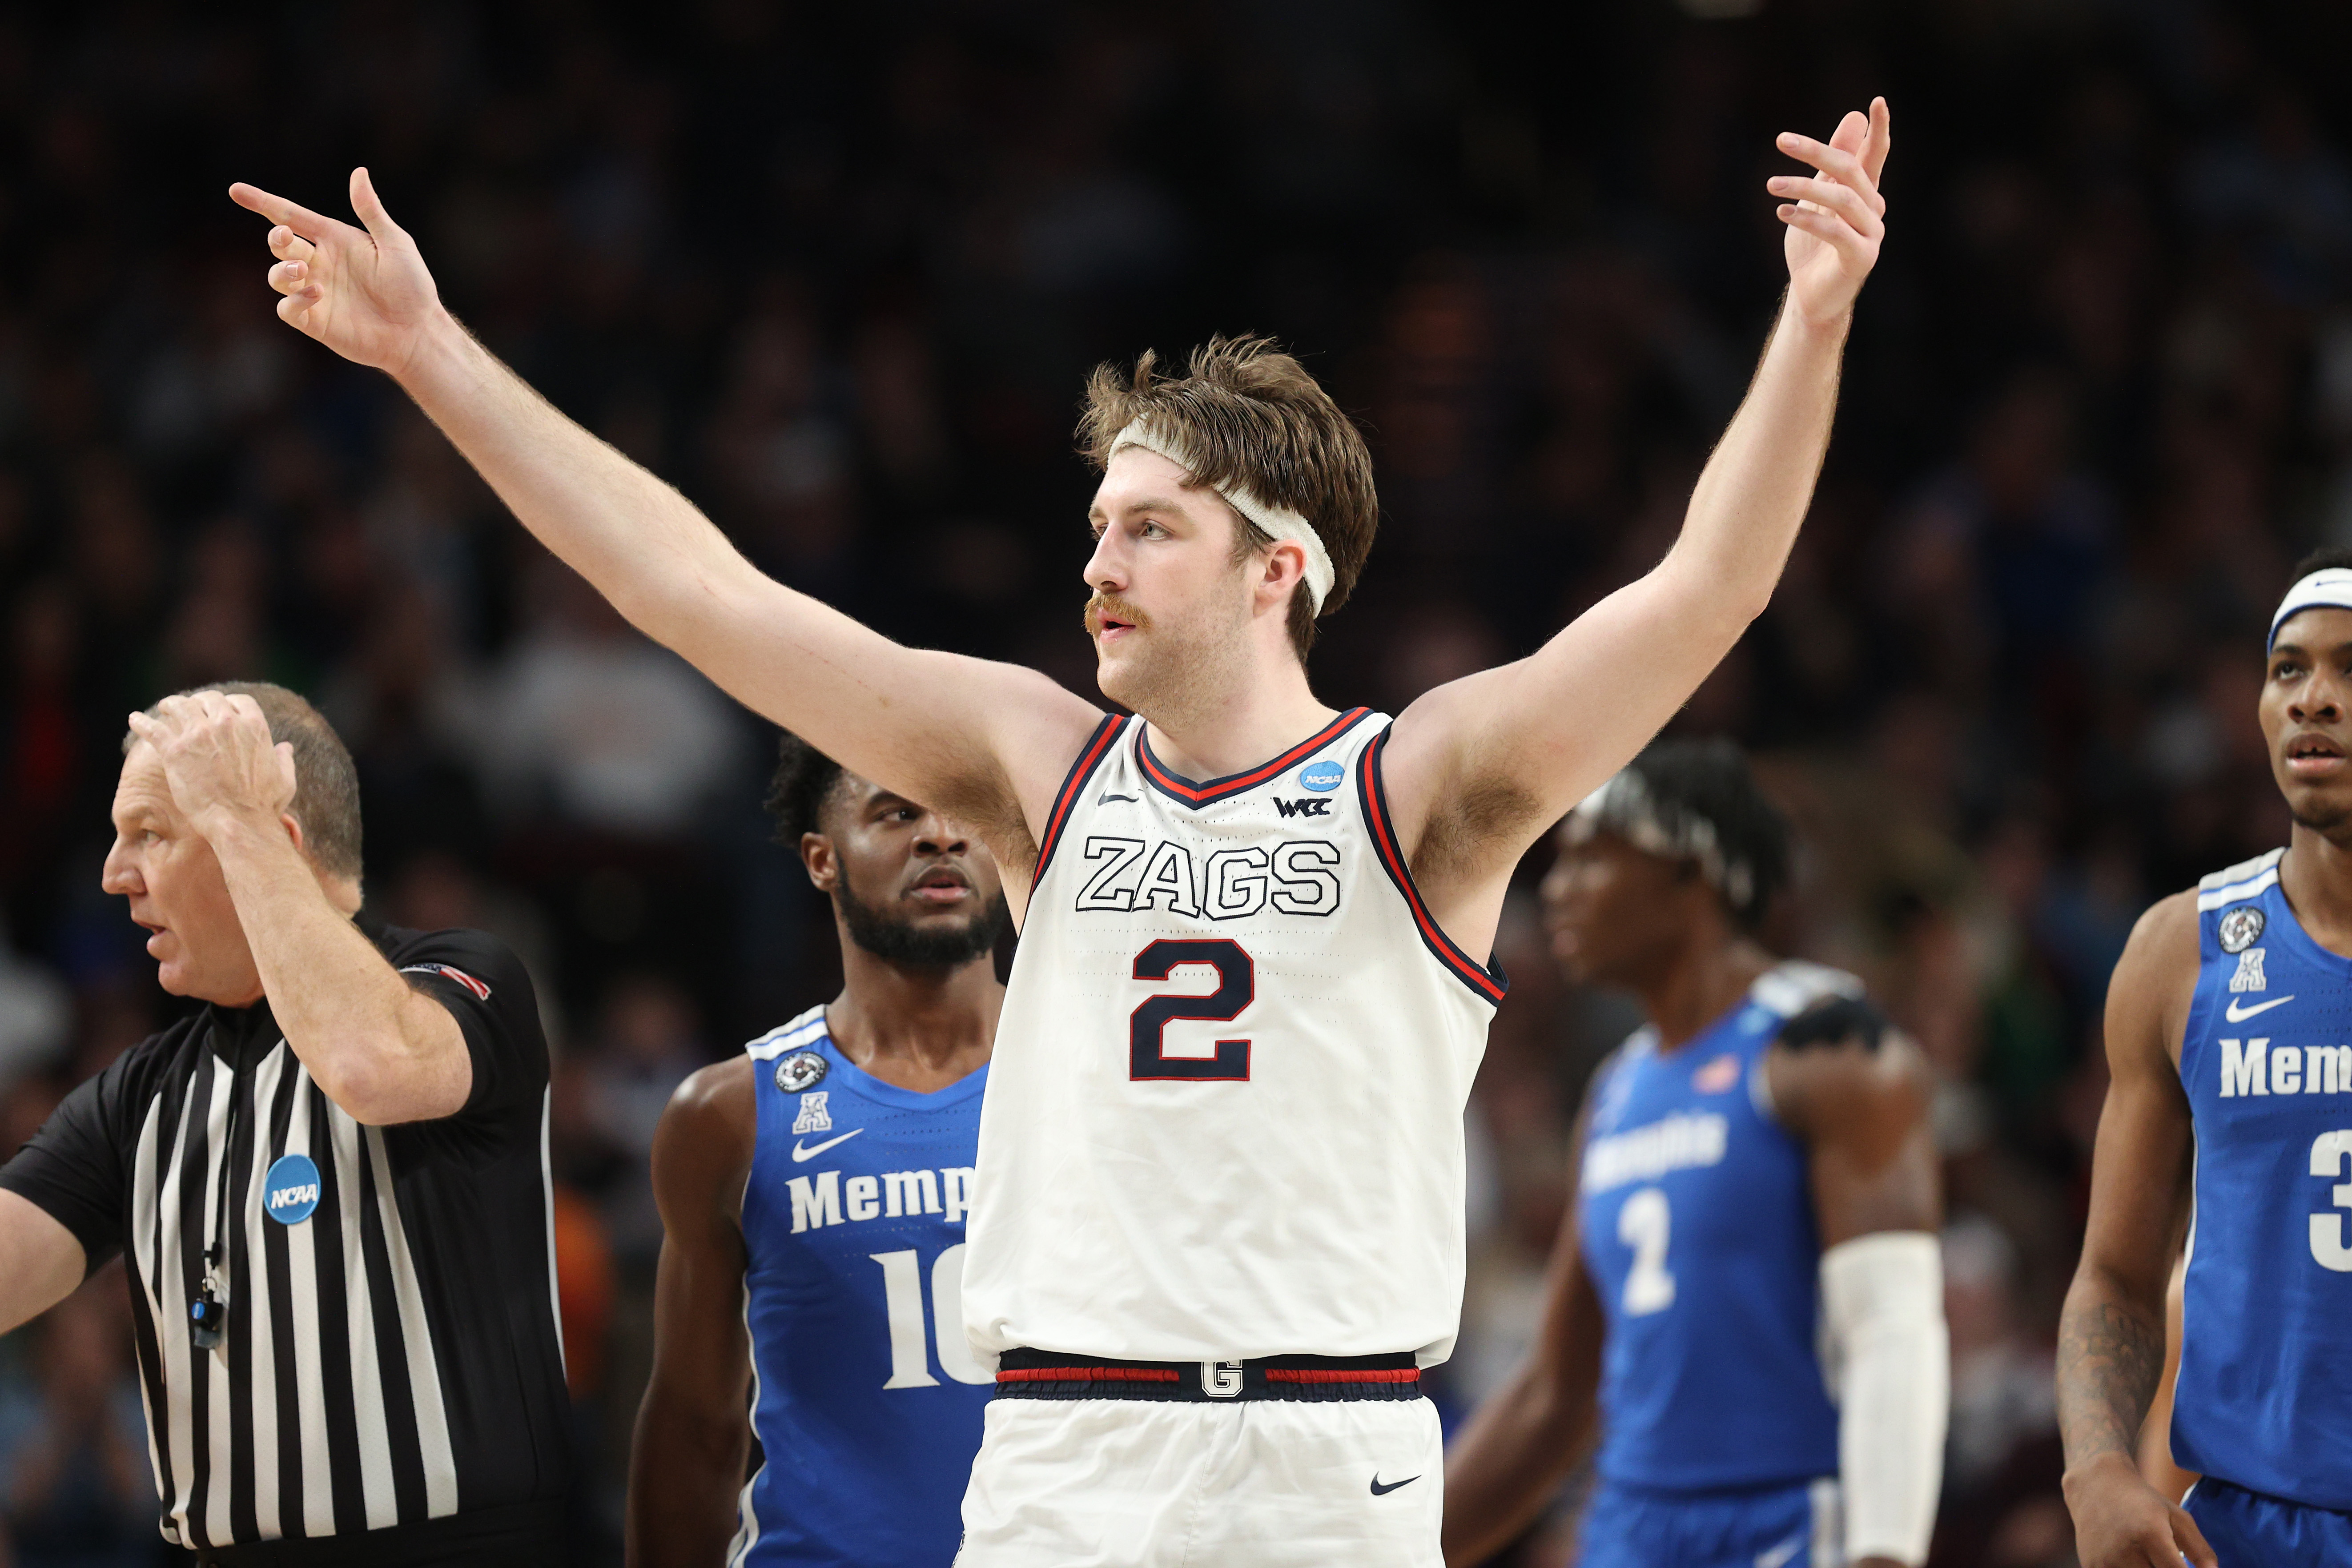 Drew Timme #2 of the Gonzaga Bulldogs reacts after making a shot during the second half against the Memphis Tigers in the second round of the 2022 NCAA Men's Basketball Tournament at Moda Center on March 19, 2022 in Portland, Oregon. 